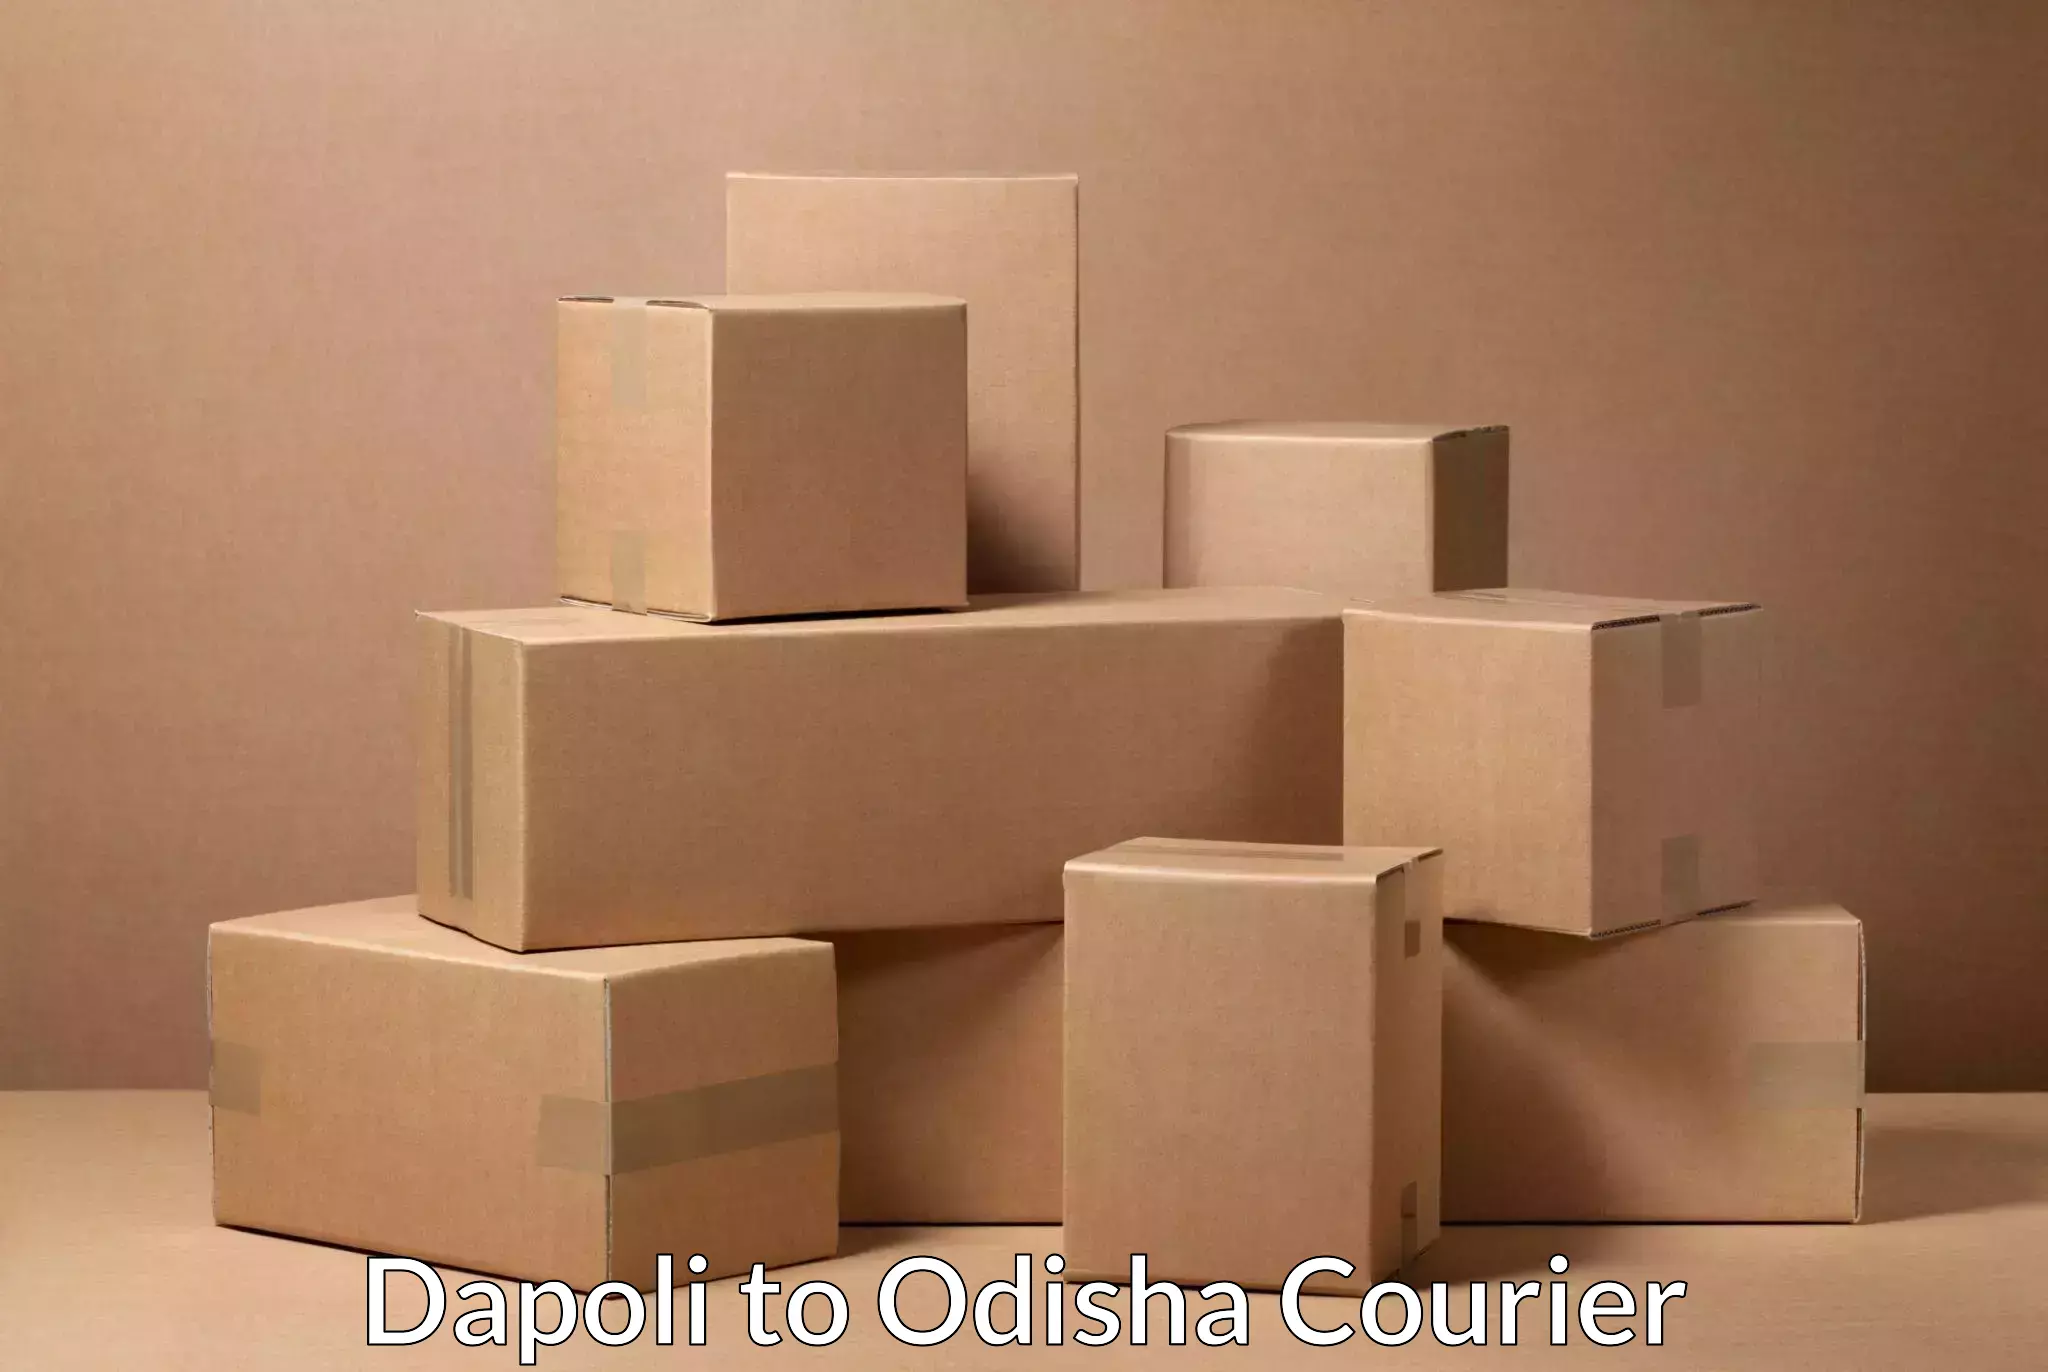 Large-scale shipping solutions Dapoli to Puri